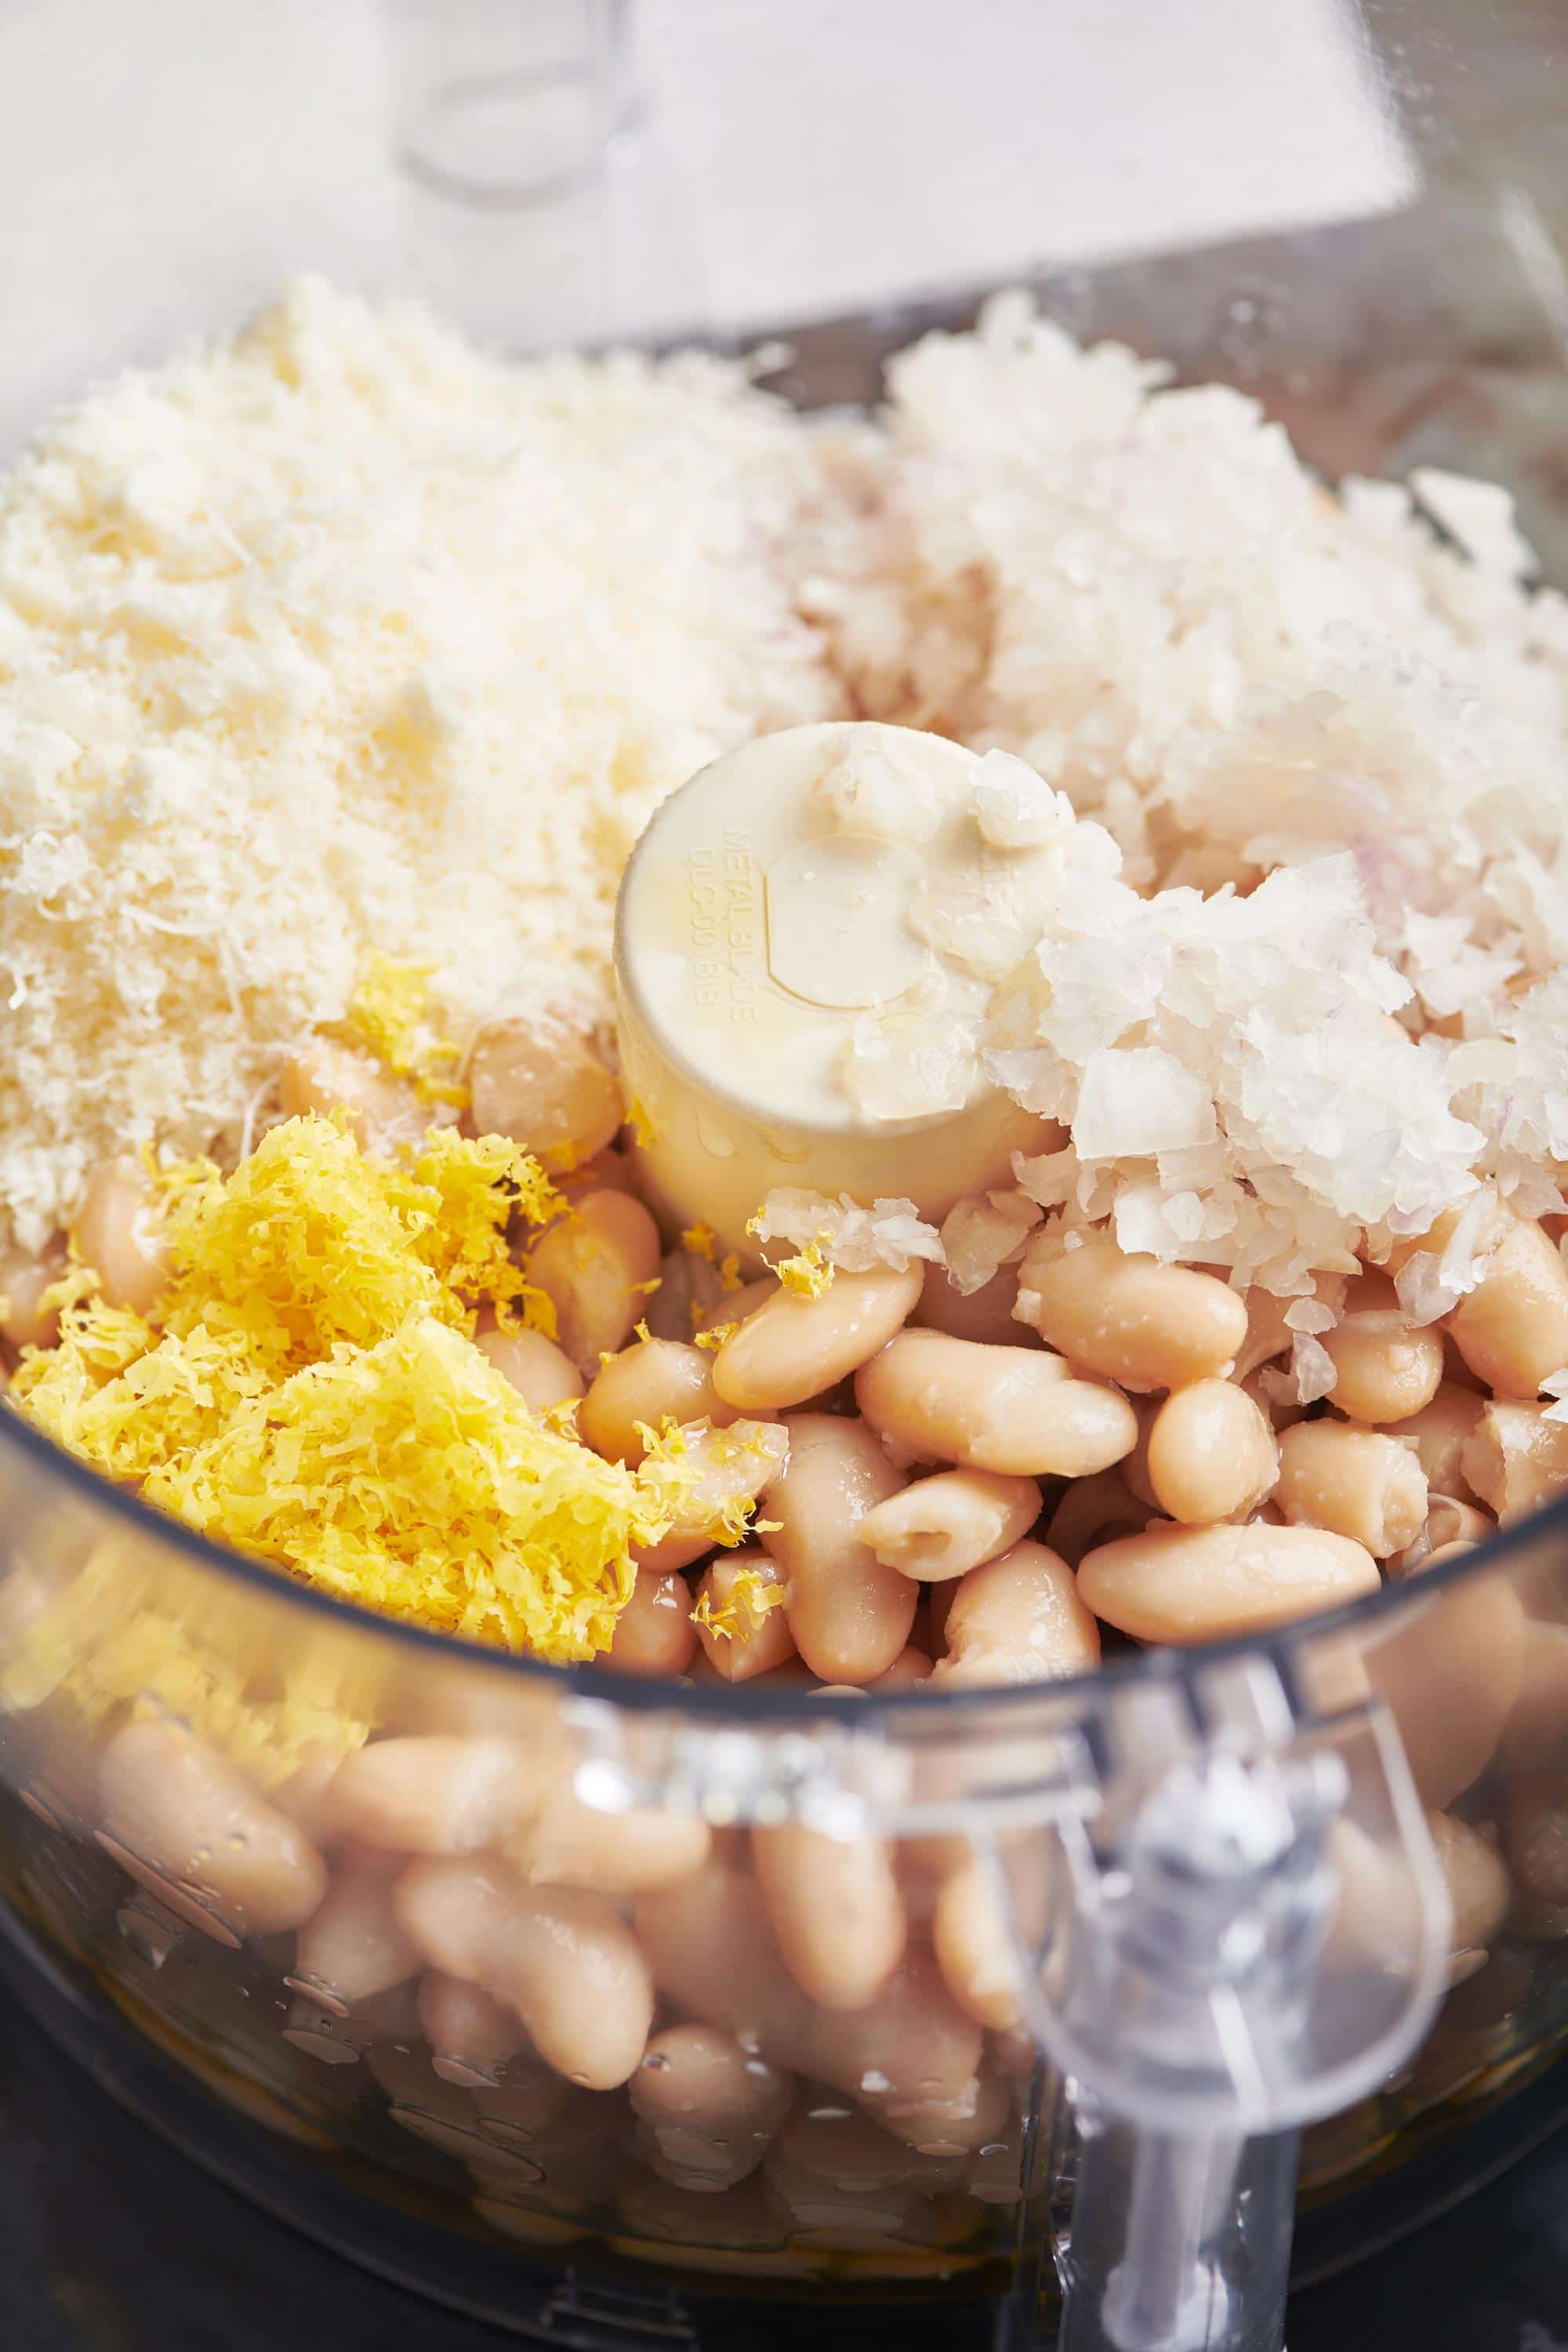 Cannellini beans, shallots, lemon zest, and parmesan in a food processor.